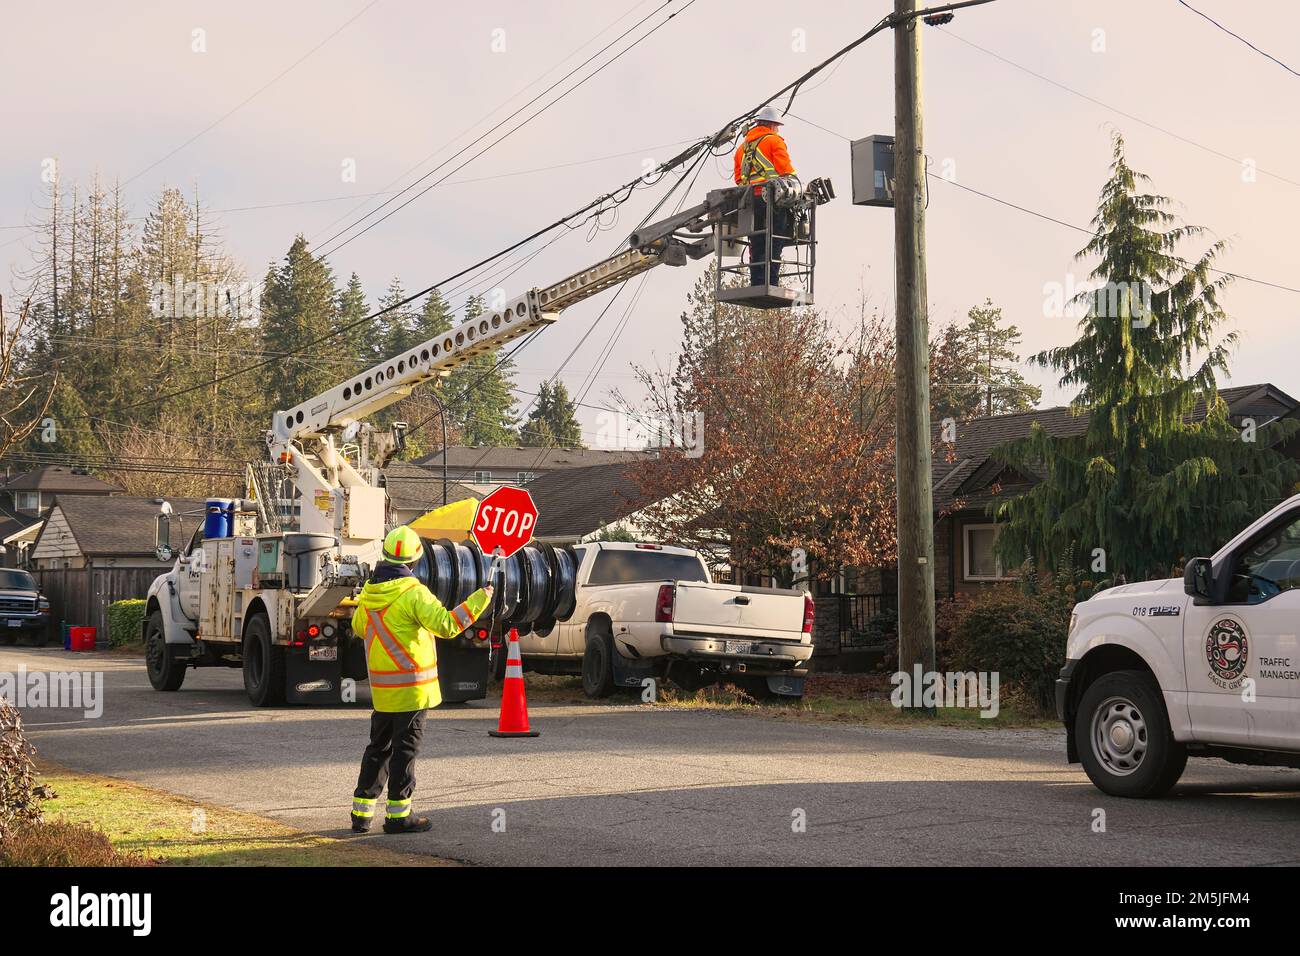 Flag person wearing high visibility jacket holding stop sign as an electrician prepares to connect Fiber Optic cables to a utility pole. Stock Photo